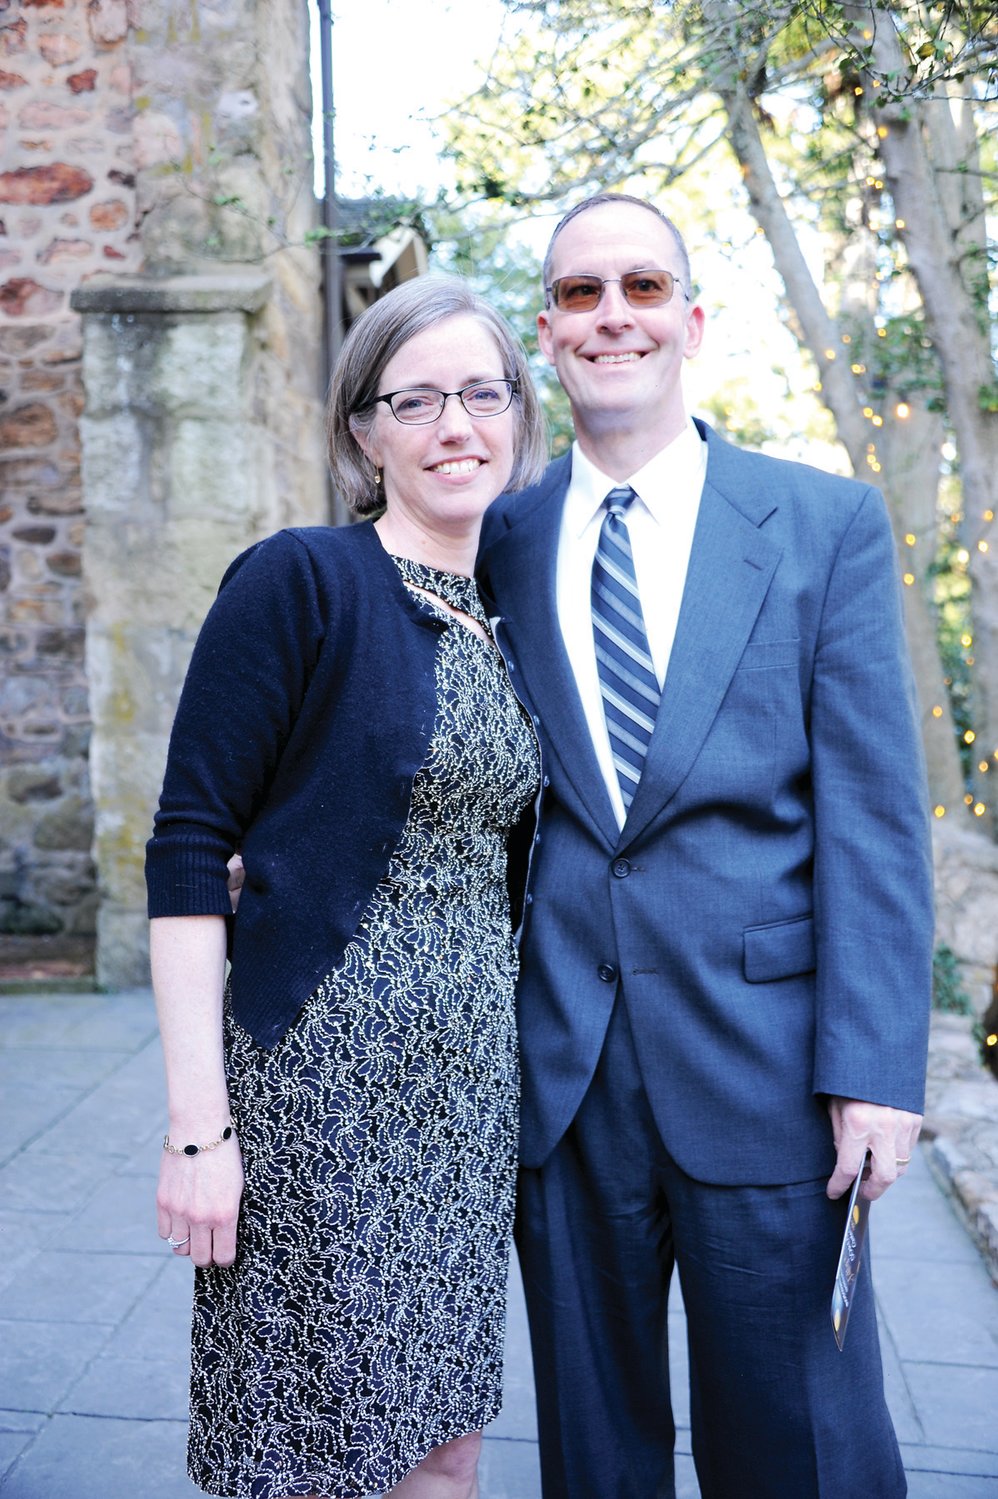 Susan and Glen McDonnell. Susan is president of the choir council of the Bucks County Choral Society.